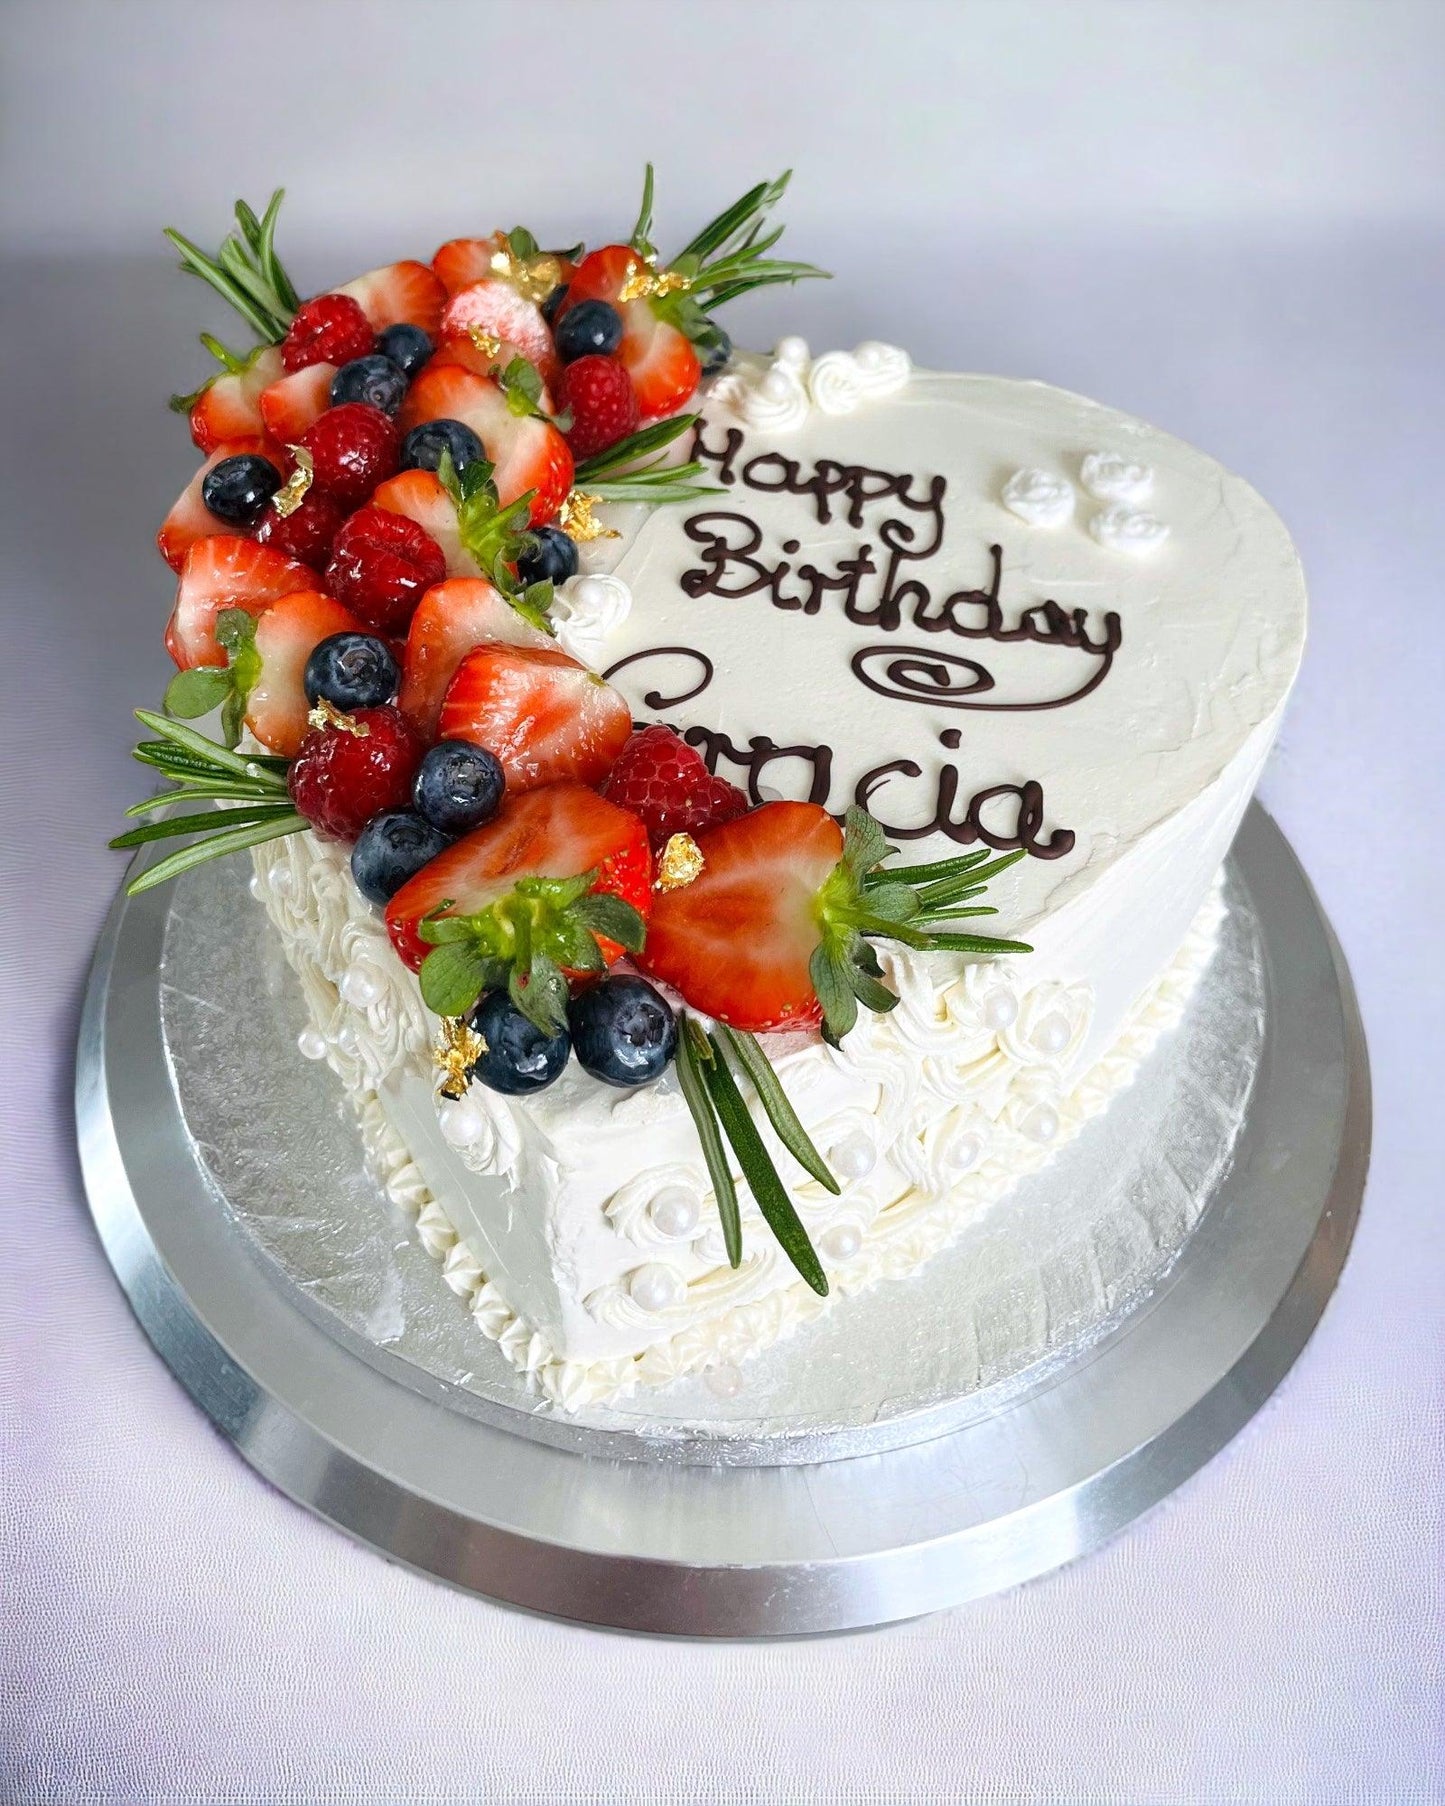 Birthday Cake in hart shape - Naturally_deliciousss